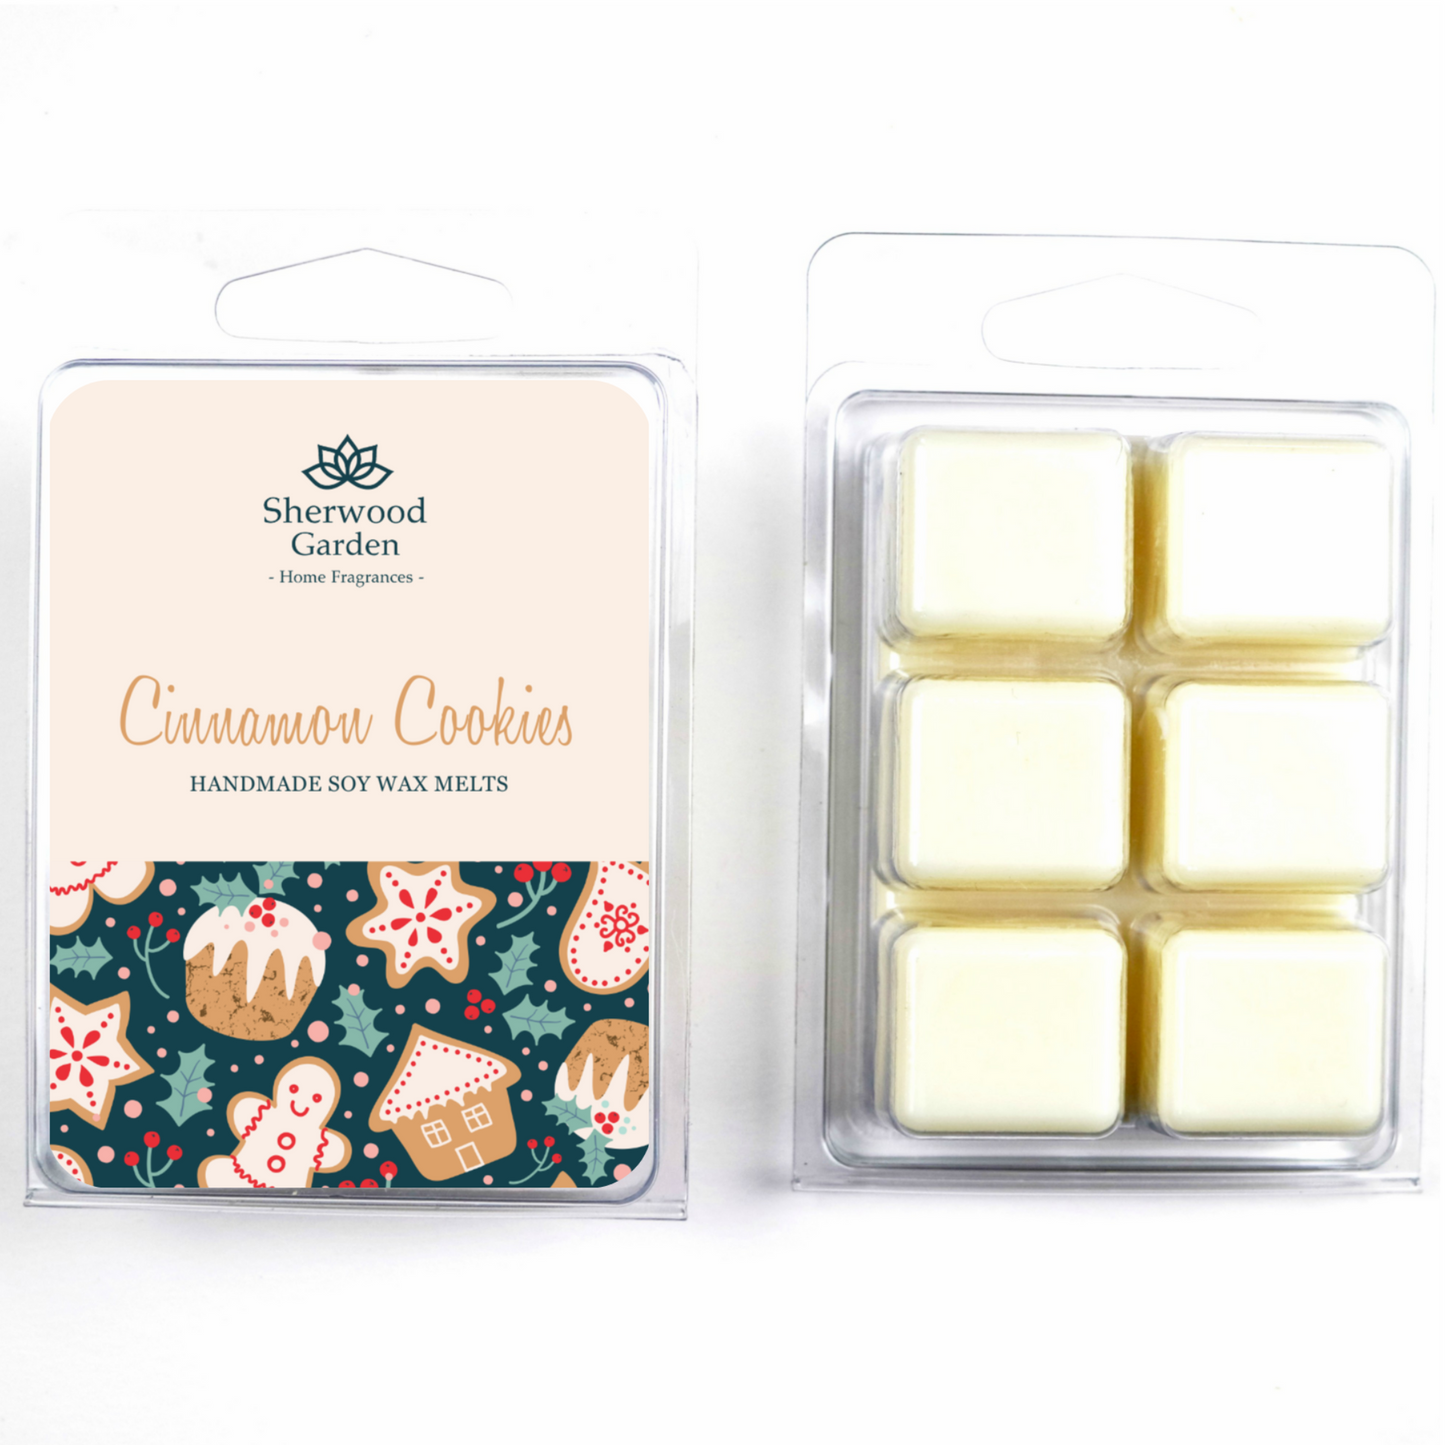 Cinnamon Cookies Soy Wax Melts 70g (Limited Edition)